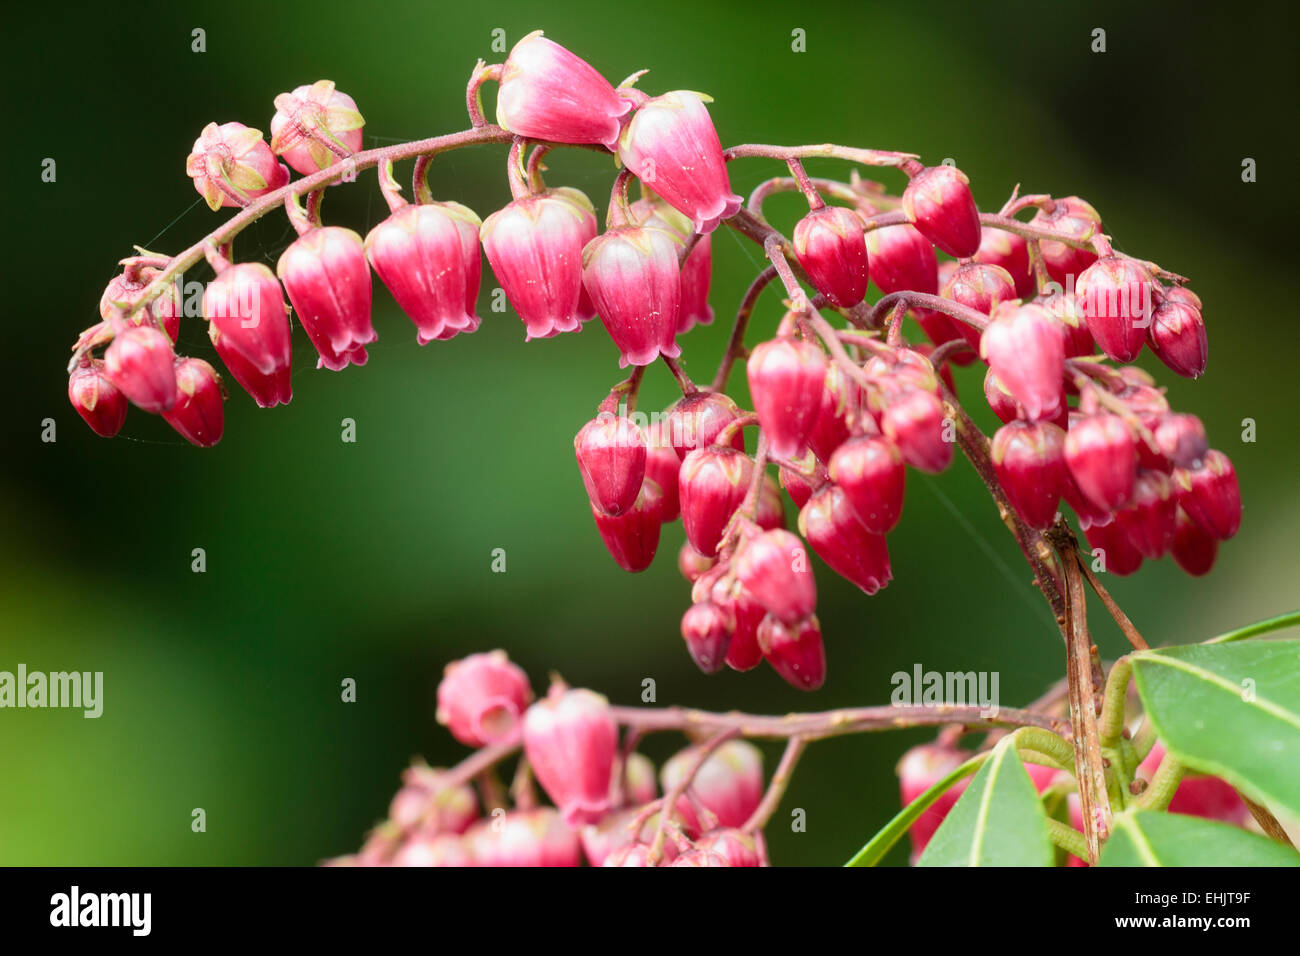 Red-pink early spring flowers of the evergreen shrub, Pieris japonica 'Valley Valentine' Stock Photo